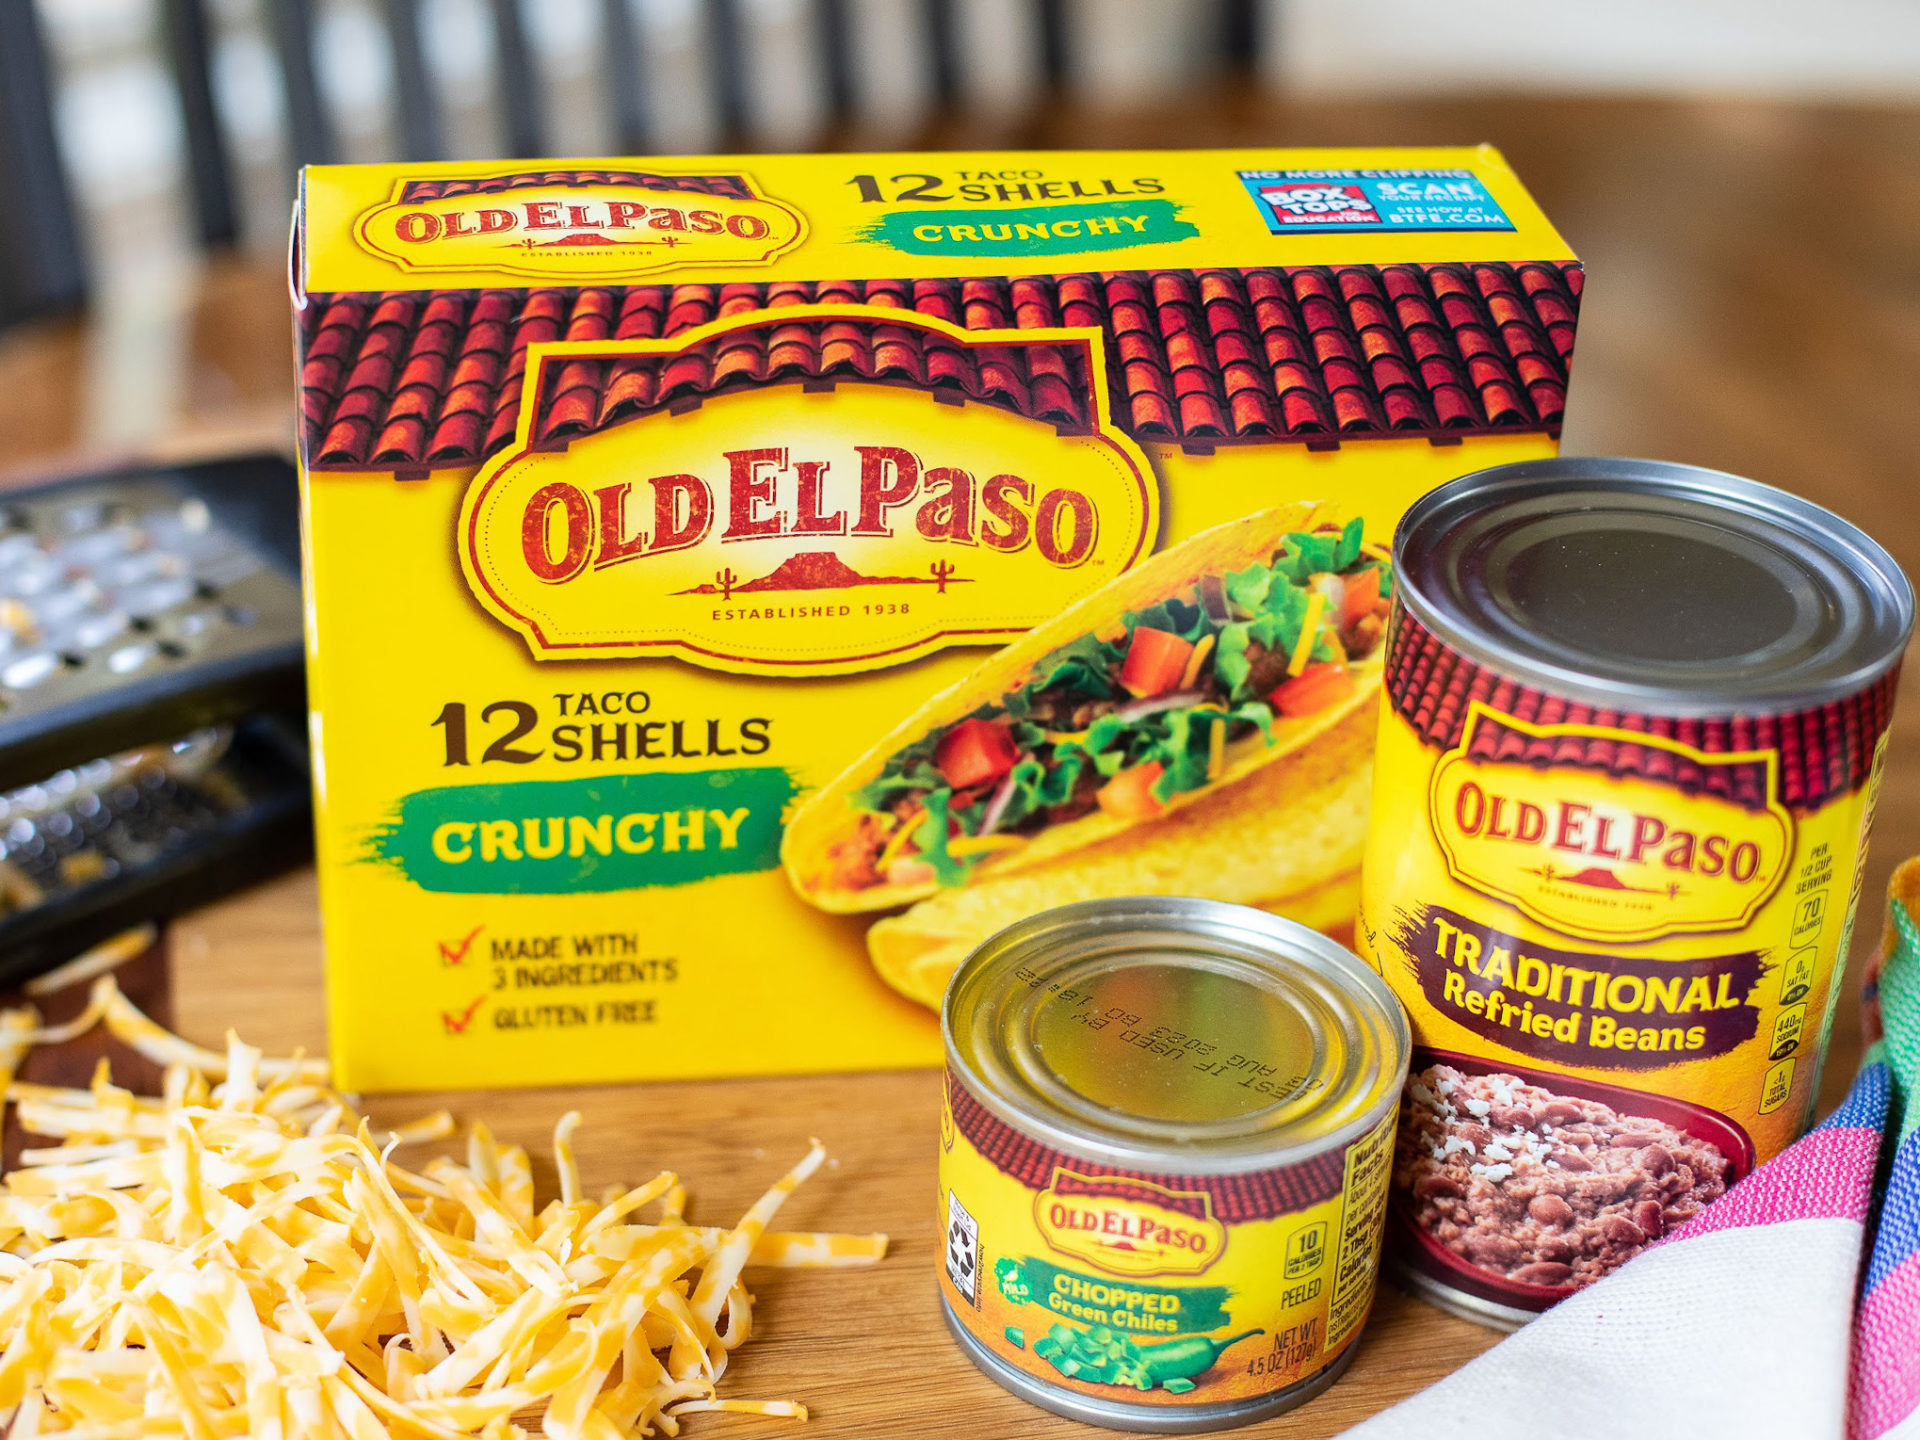 Taco Tuesday On The Cheap With Great Deals On Old El Paso Products At Kroger